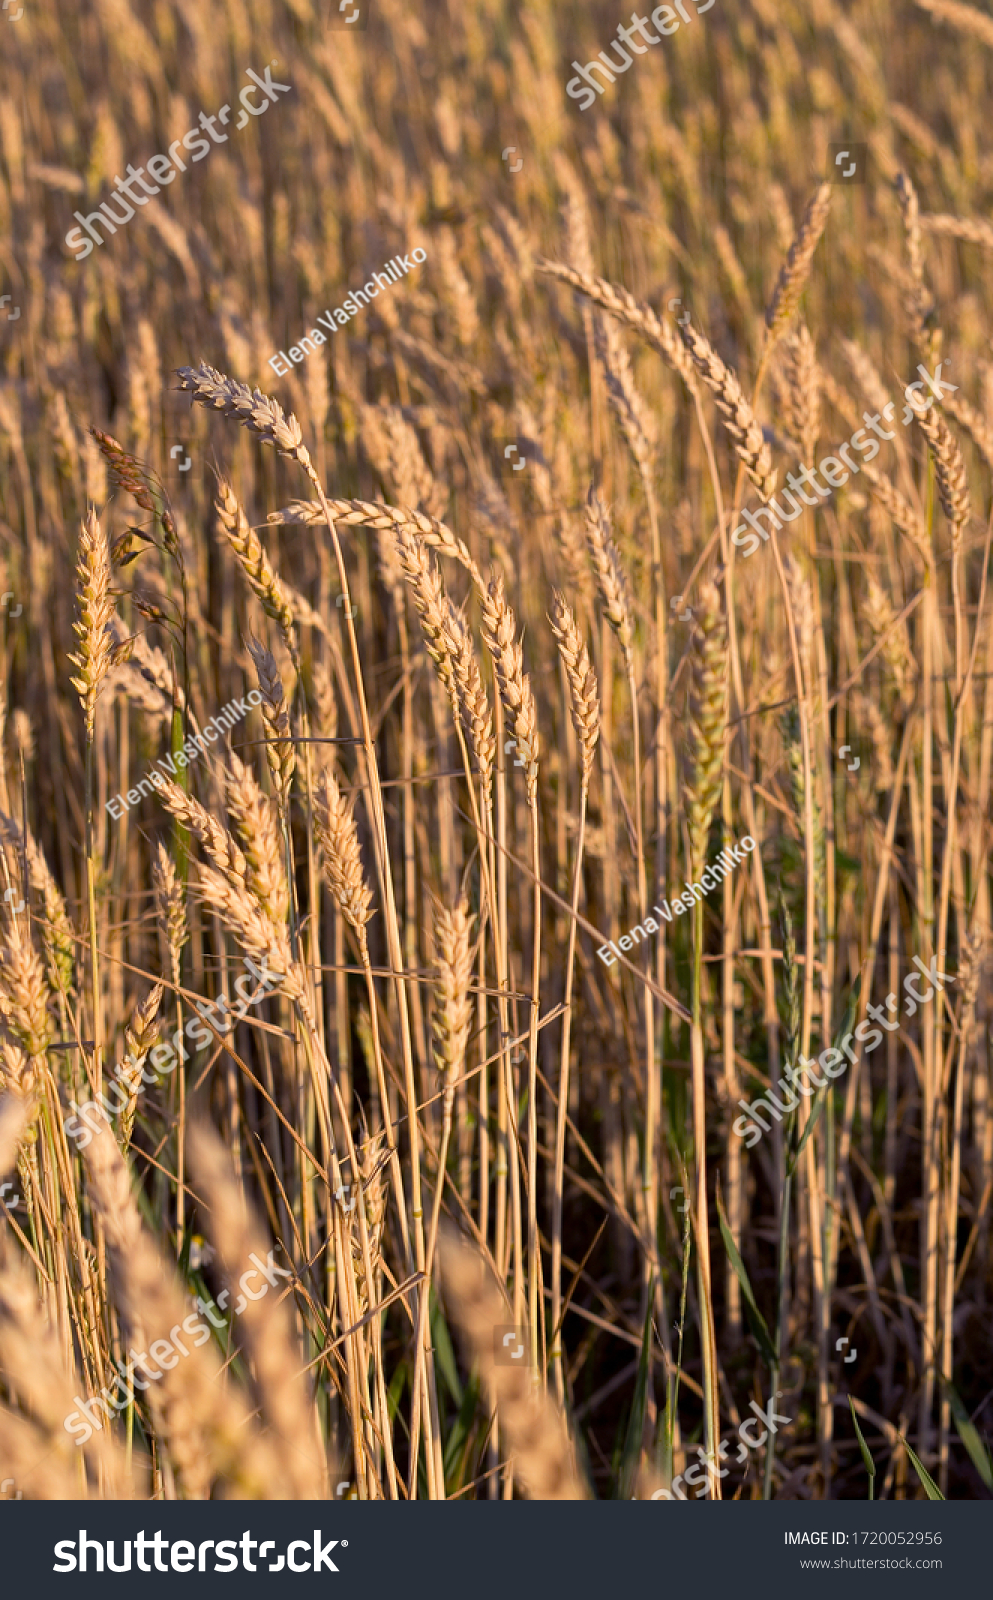 Spikelets of raw wheat in the evening sun, field, warm colors, Belarus, summer #1720052956